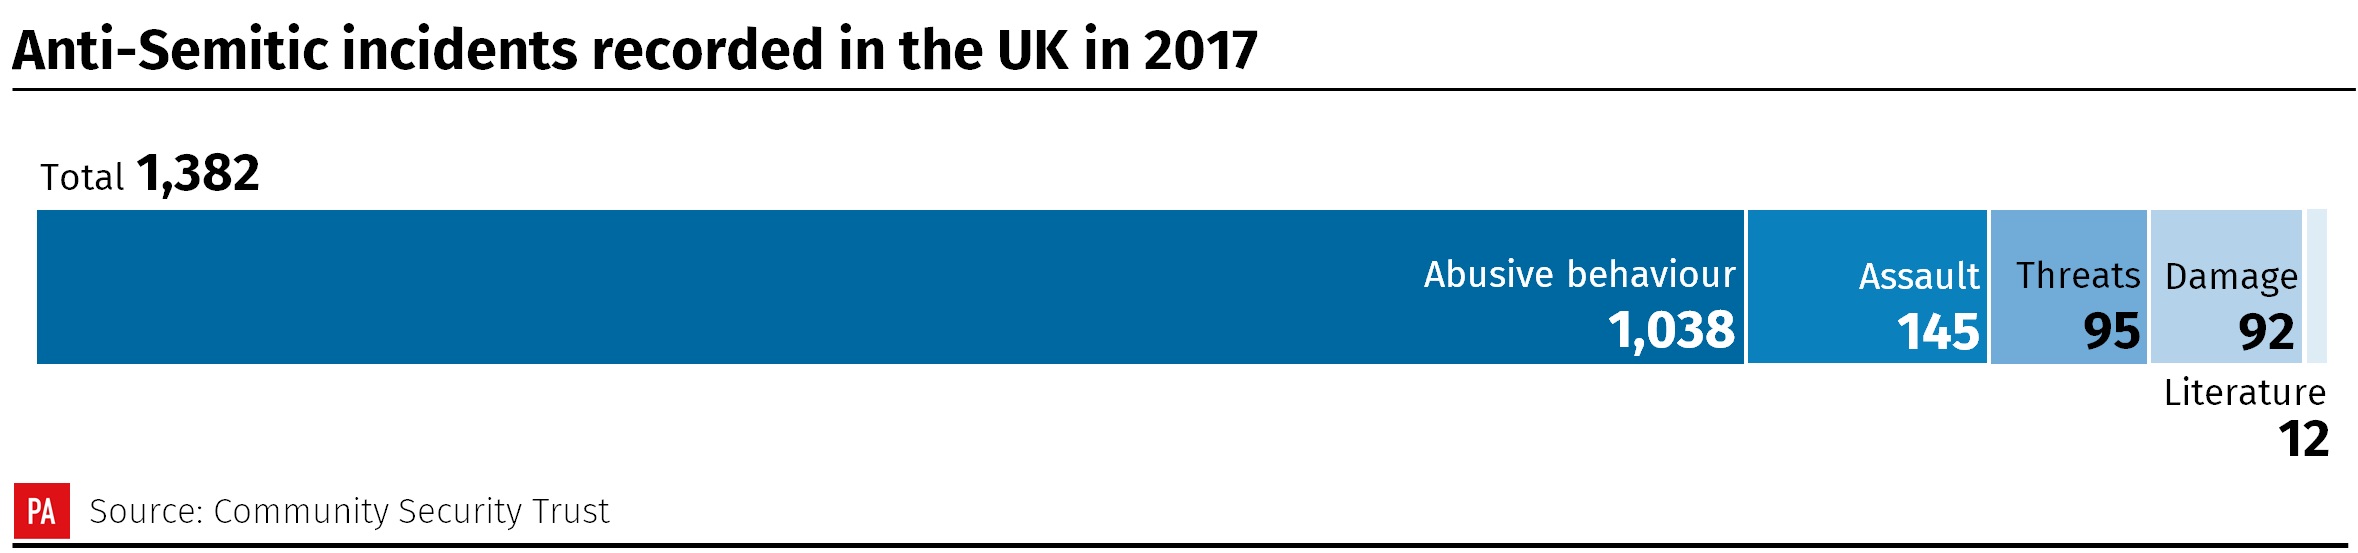 Anti-Semitic incidents recorded in the UK in 2017